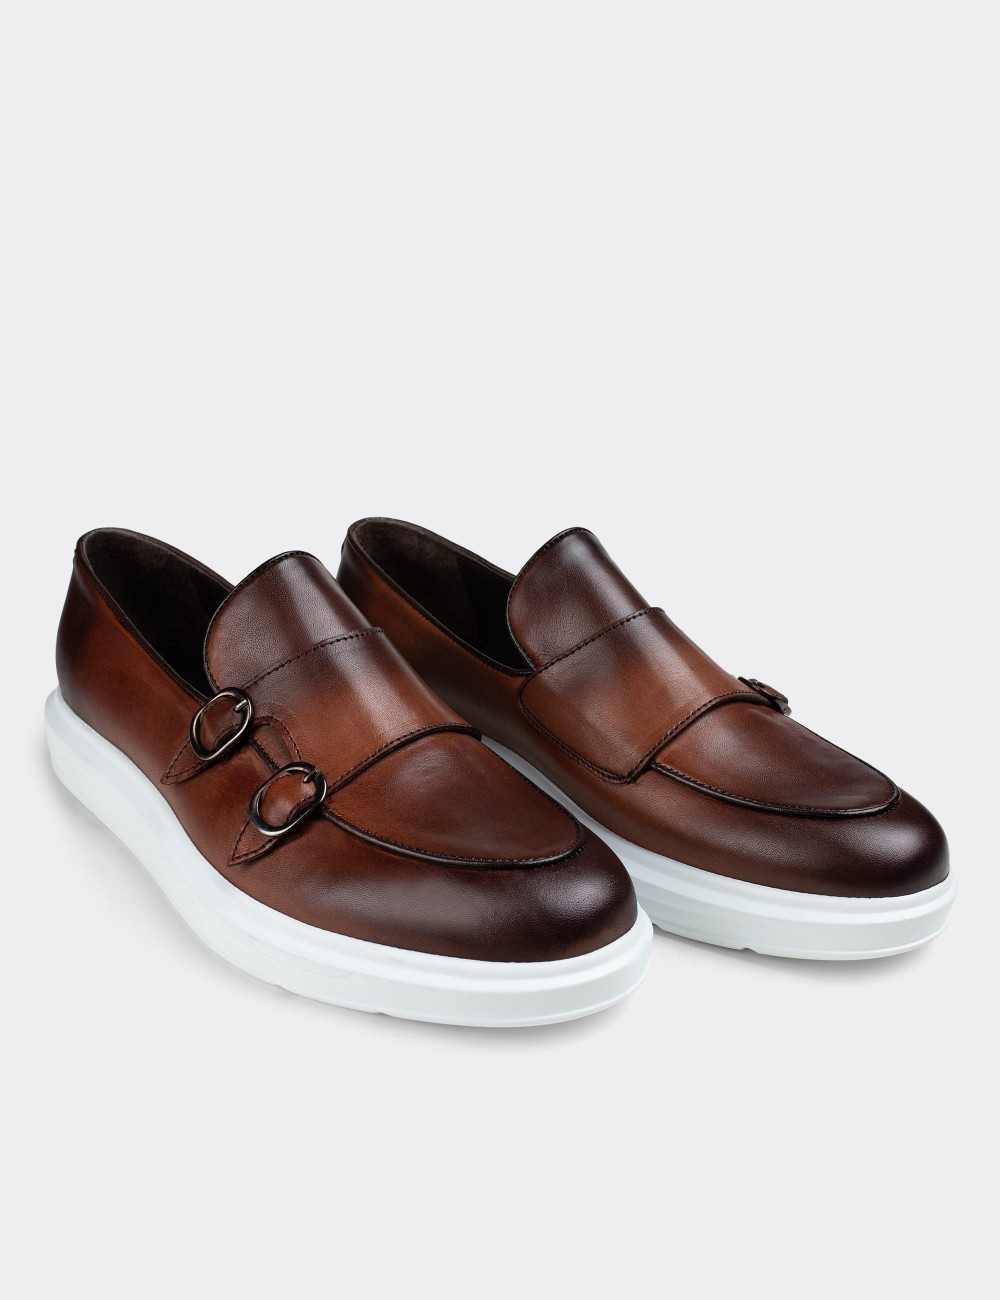 Tan  Leather Double Monk-Strap Loafers - 01843MTBAP01